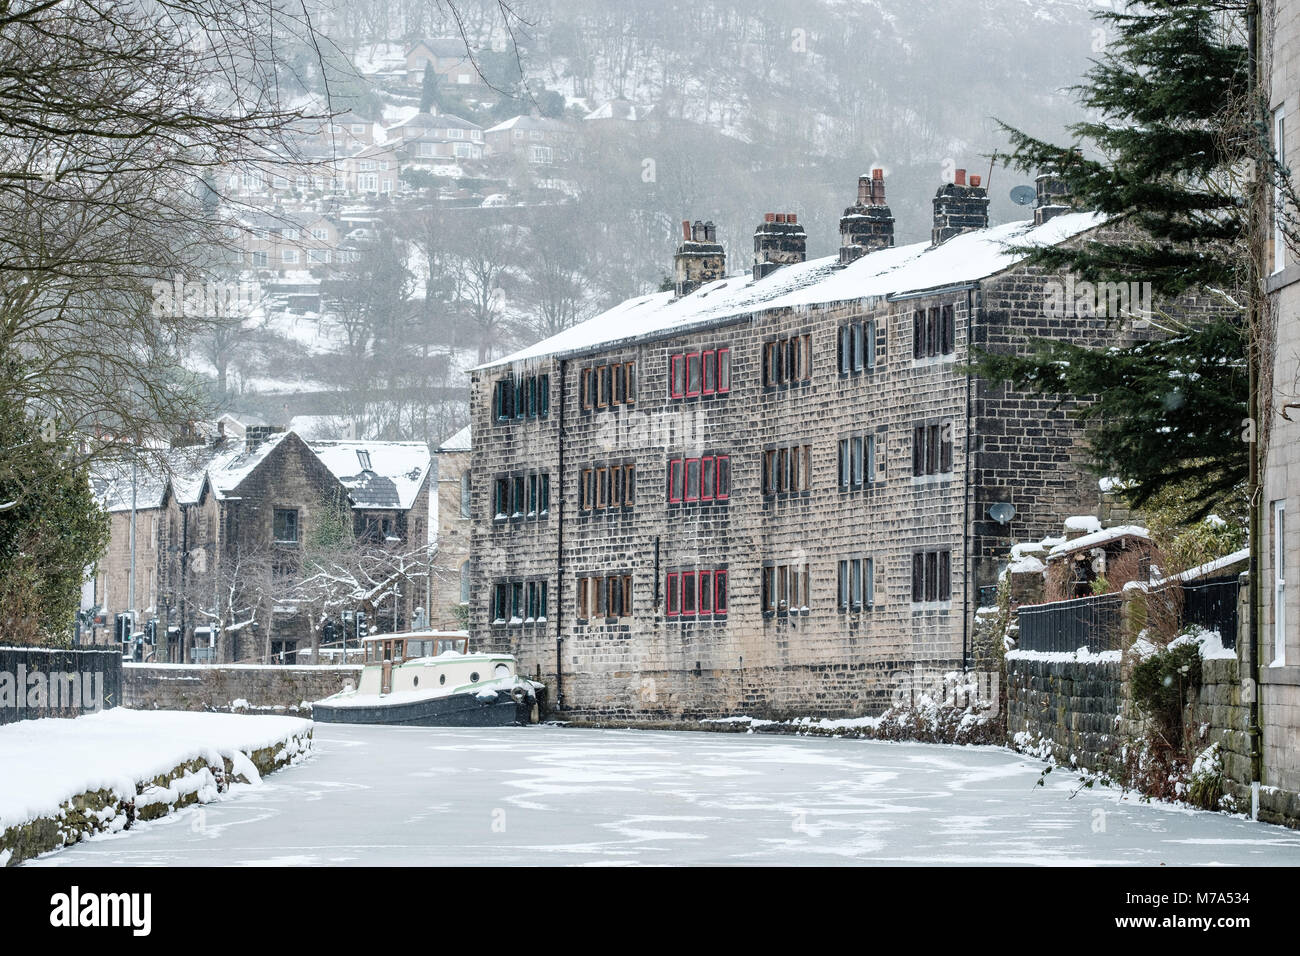 View of Hebden Bridge, a mill town in West Yorkshire, in the grip of the 'Beast from the East' weather event in 2018. Stock Photo